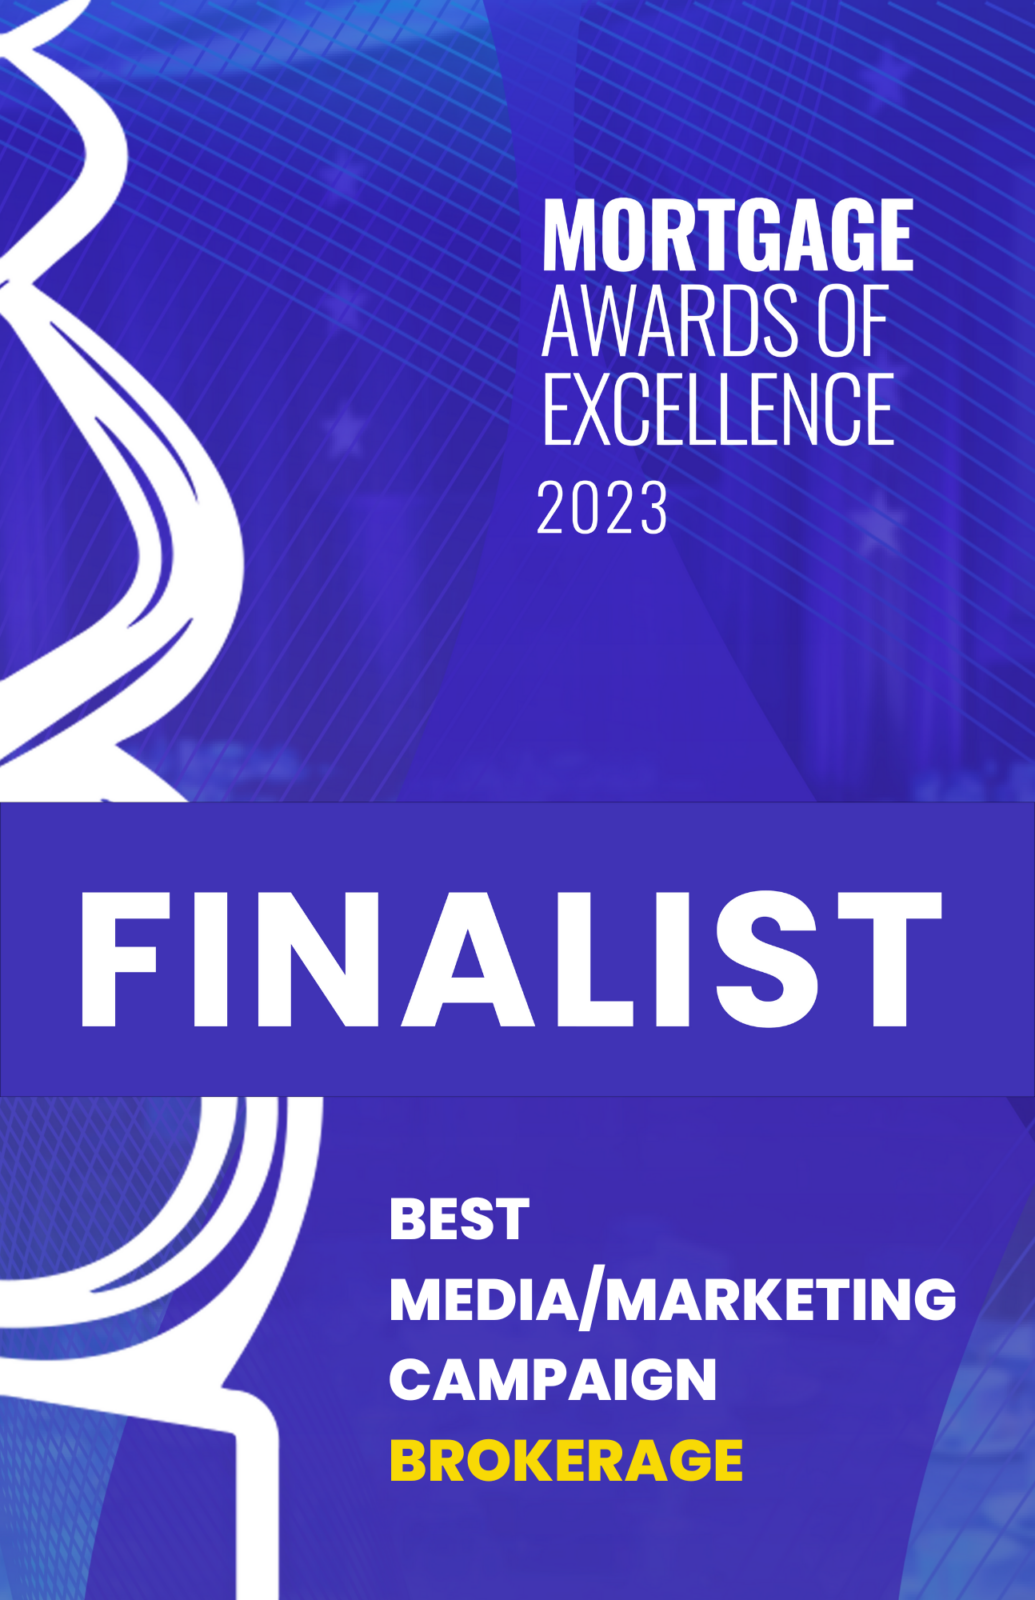 Mortgage Award of Excellence 2023: Finalist Best Media/Marketing Campaign Brokerage Mortgage Scout